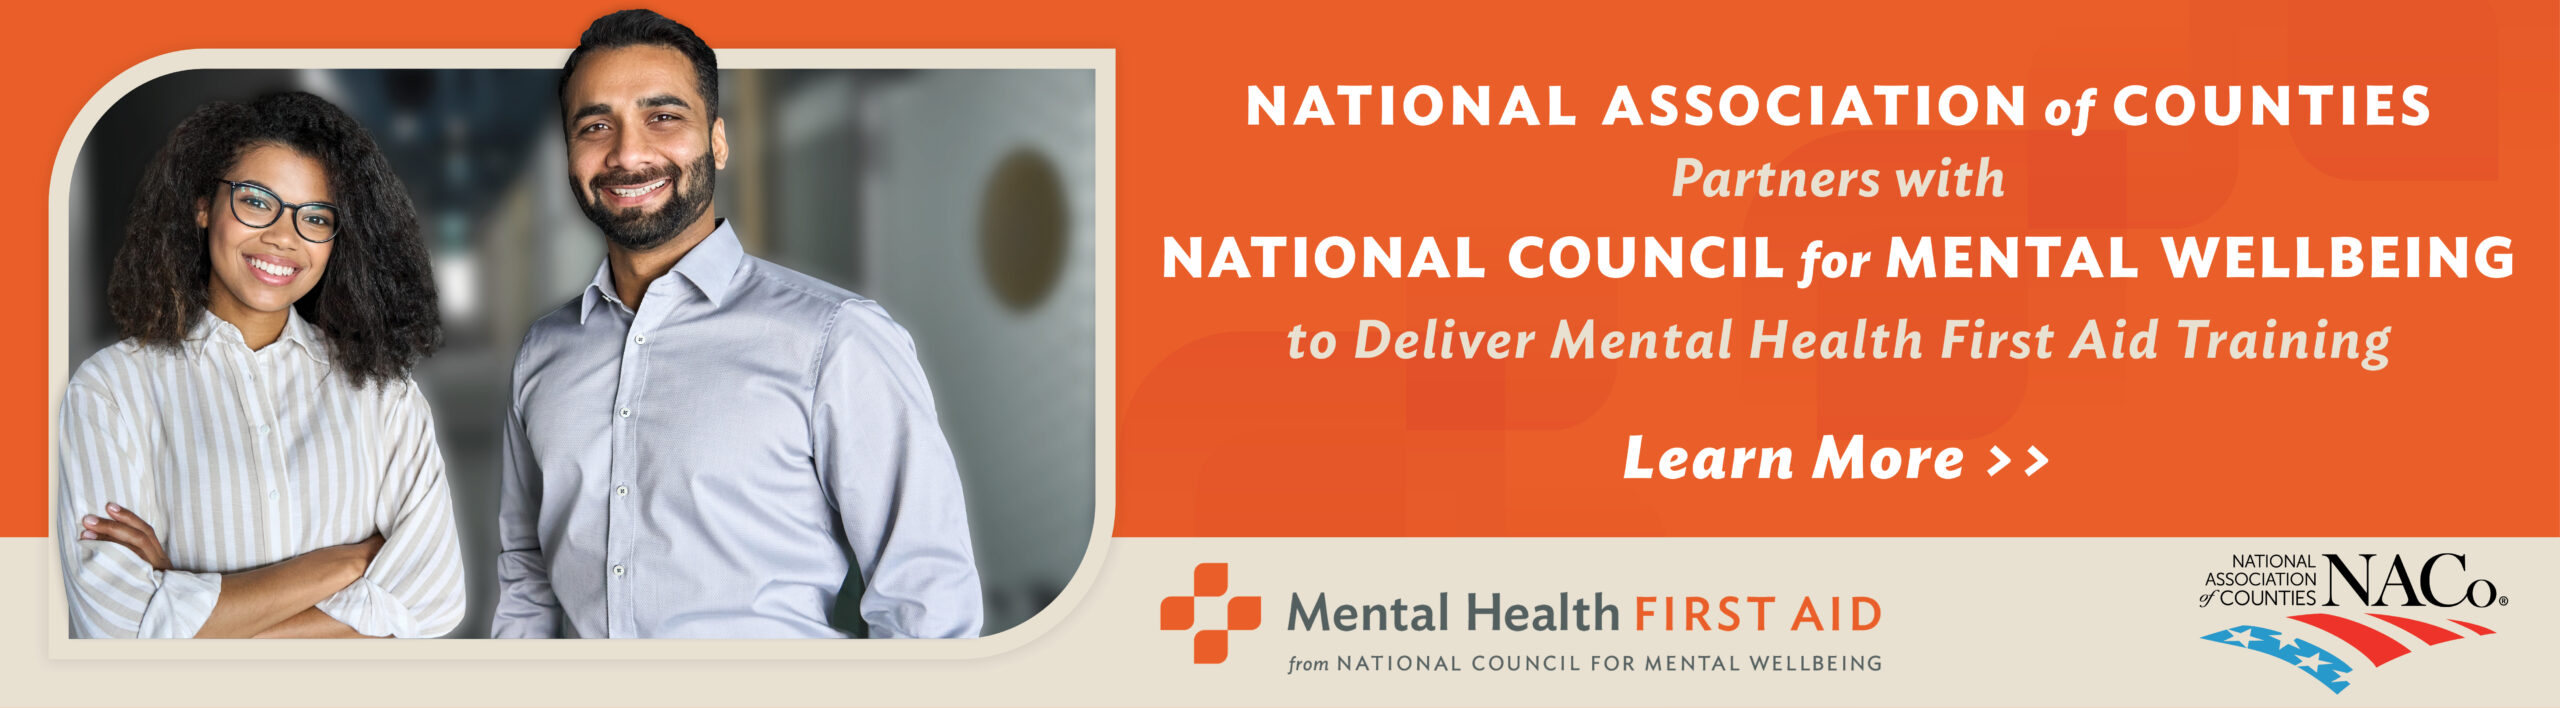 National Association of Counties Partners with National Council for Mental Wellbeing